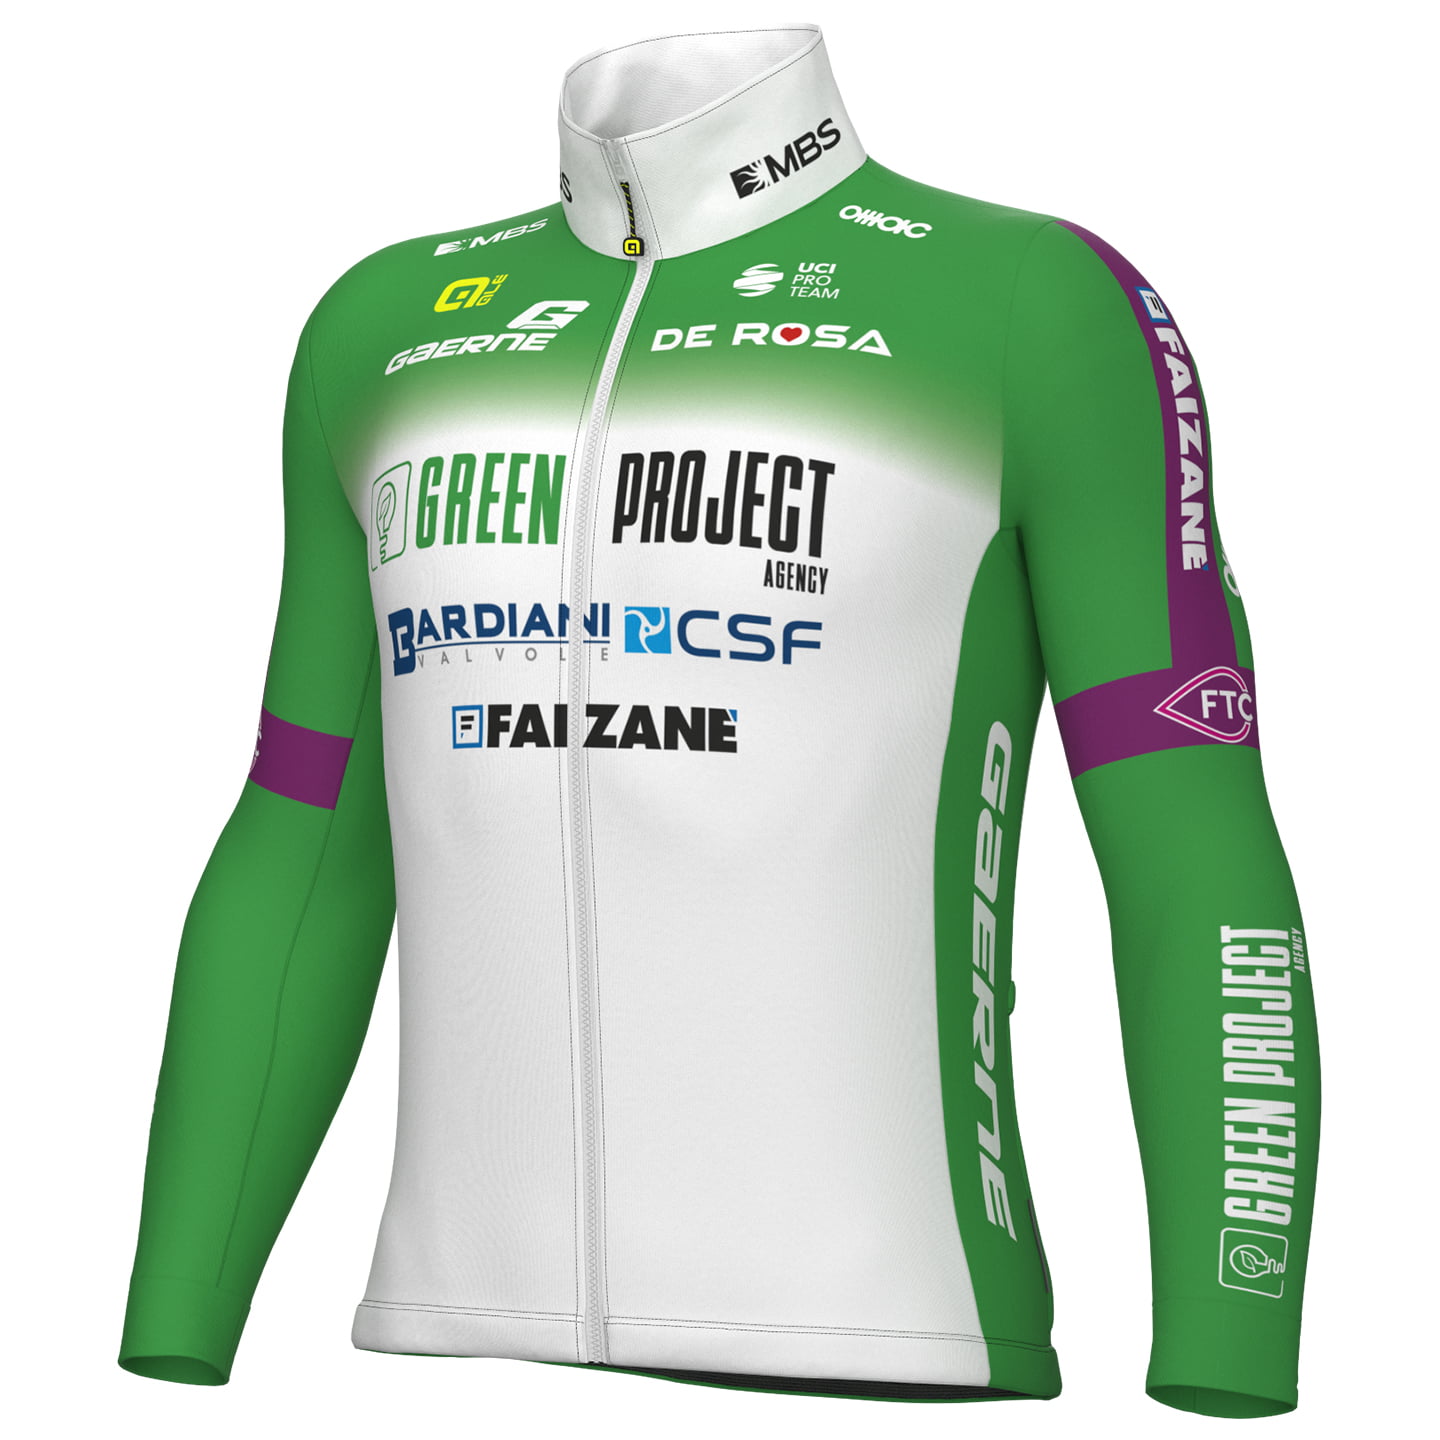 GREEN PROJECT-BARDIANI CSF-FAIZANE 2023 Thermal Jacket, for men, size L, Cycle jacket, Cycle gear